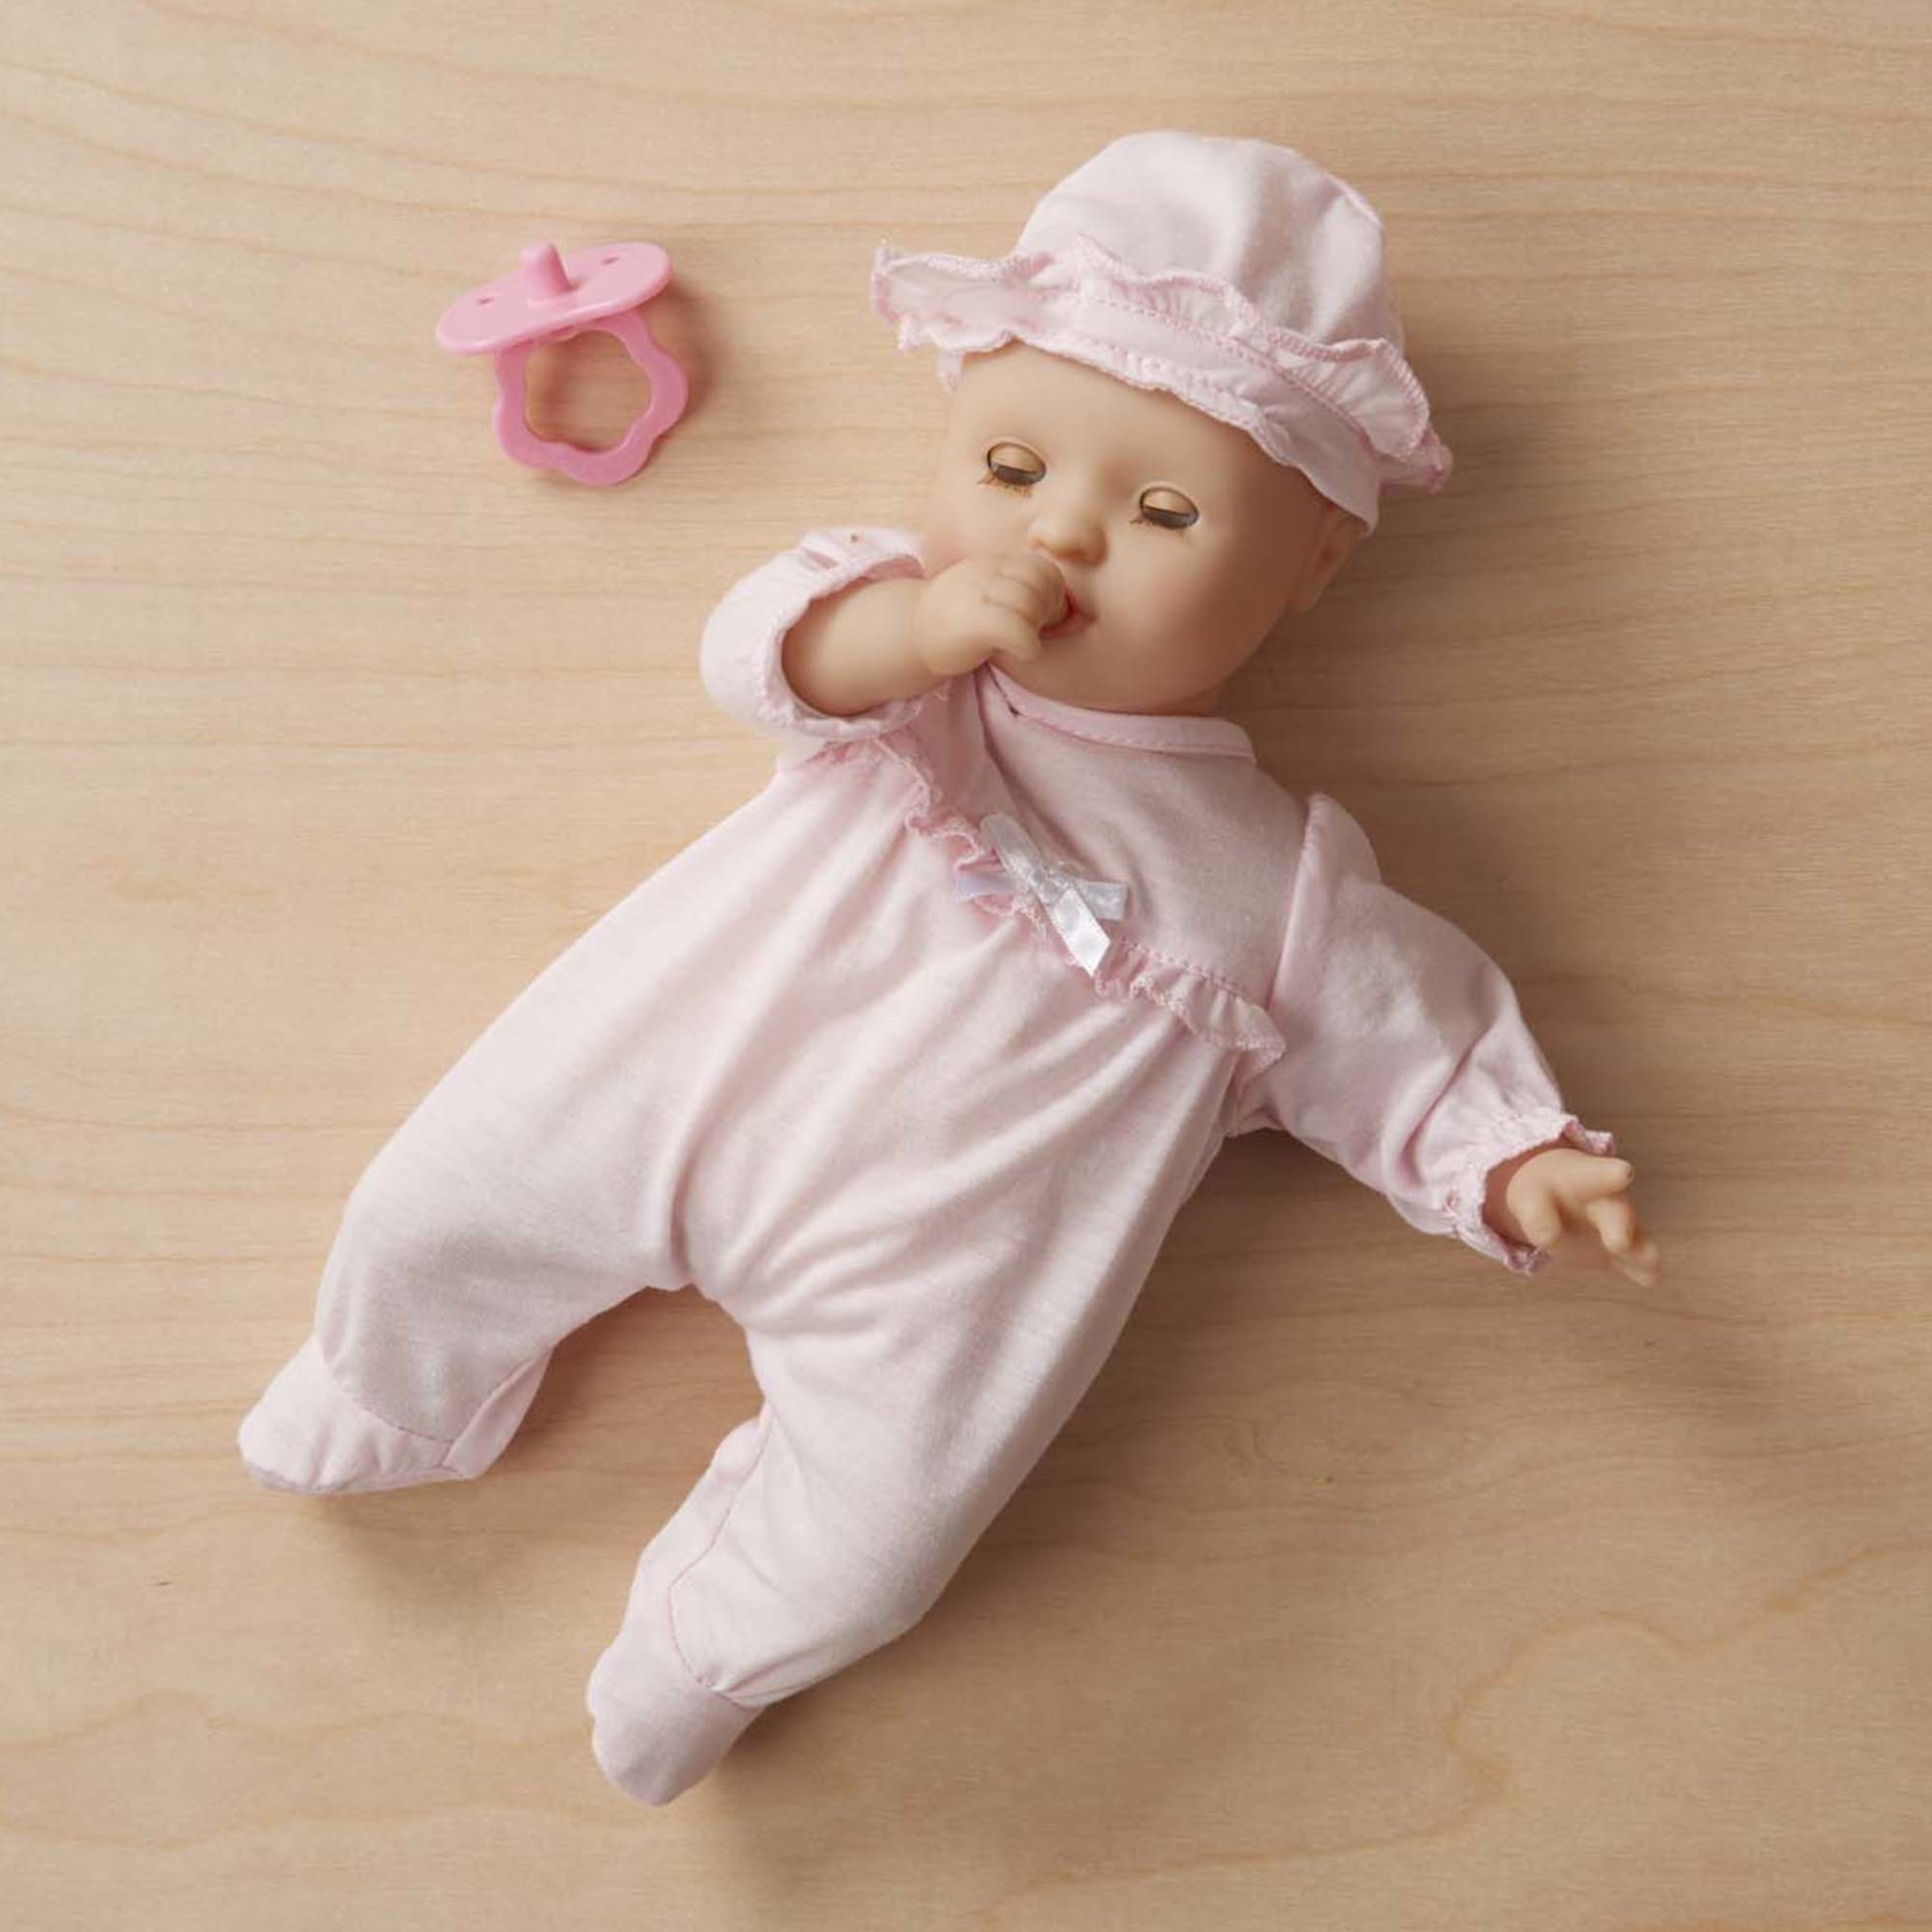 Melissa & Doug Mine to Love Jenna 12" Soft Body Baby Doll With Romper, Hat - image 10 of 10